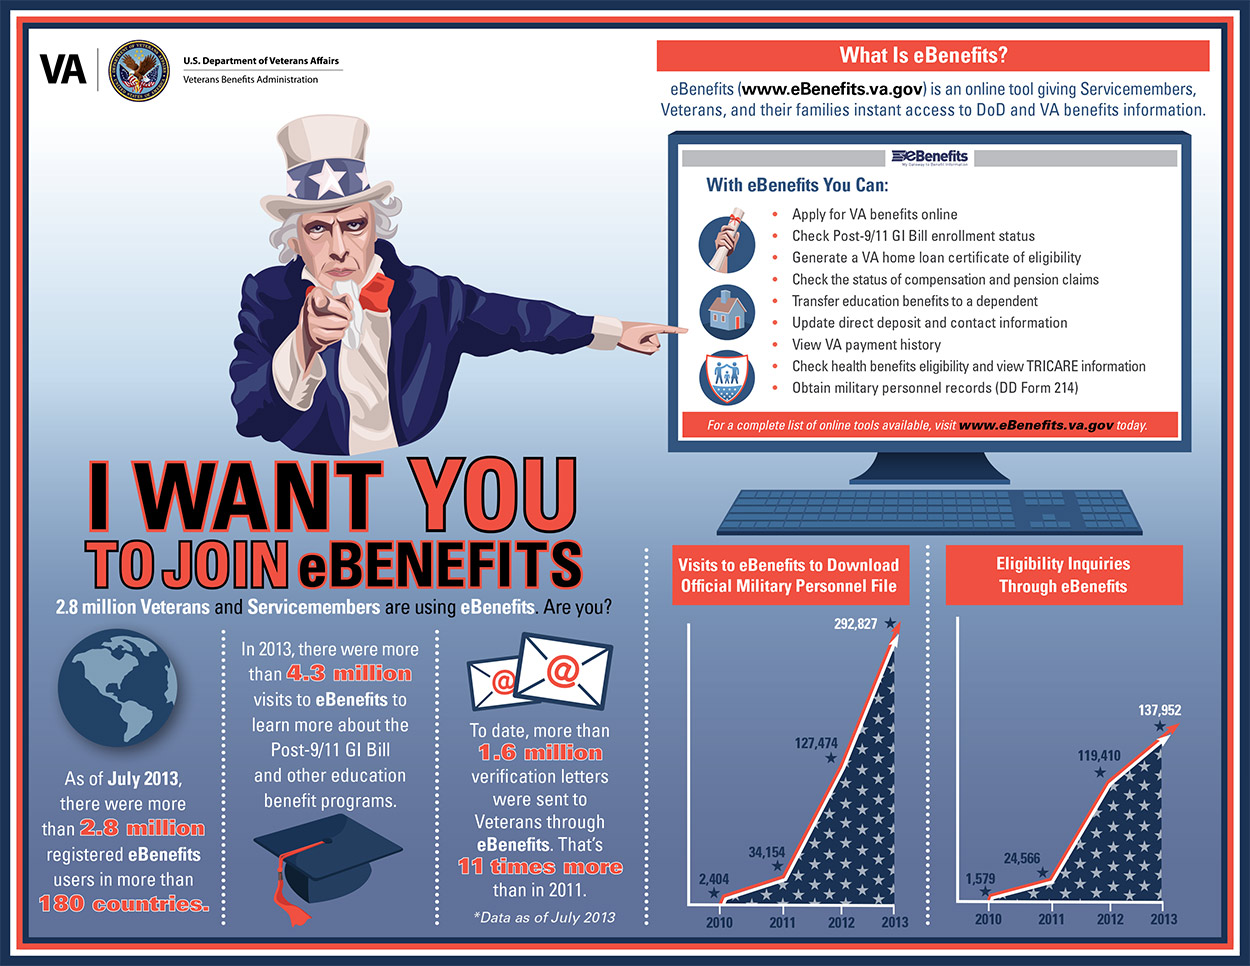 Uncle Sam pointing one finger to the user and pointing the other hand to a computer monitor showing the eBenefits website. Patriotic color scheme of red, white and blue. Line graph shows the increasing number of visitors who download official military personnel files on eBenefits. Line graph shows the increasing number of visitors who submit eligibility inquiries on eBenefits. The eBenefits Web page has three images showing what Veterans can support using eBenefits: a diploma representing an education, a house, and a family. Please see PDF Download link to view an accessible PDF that addresses the text content of this document.